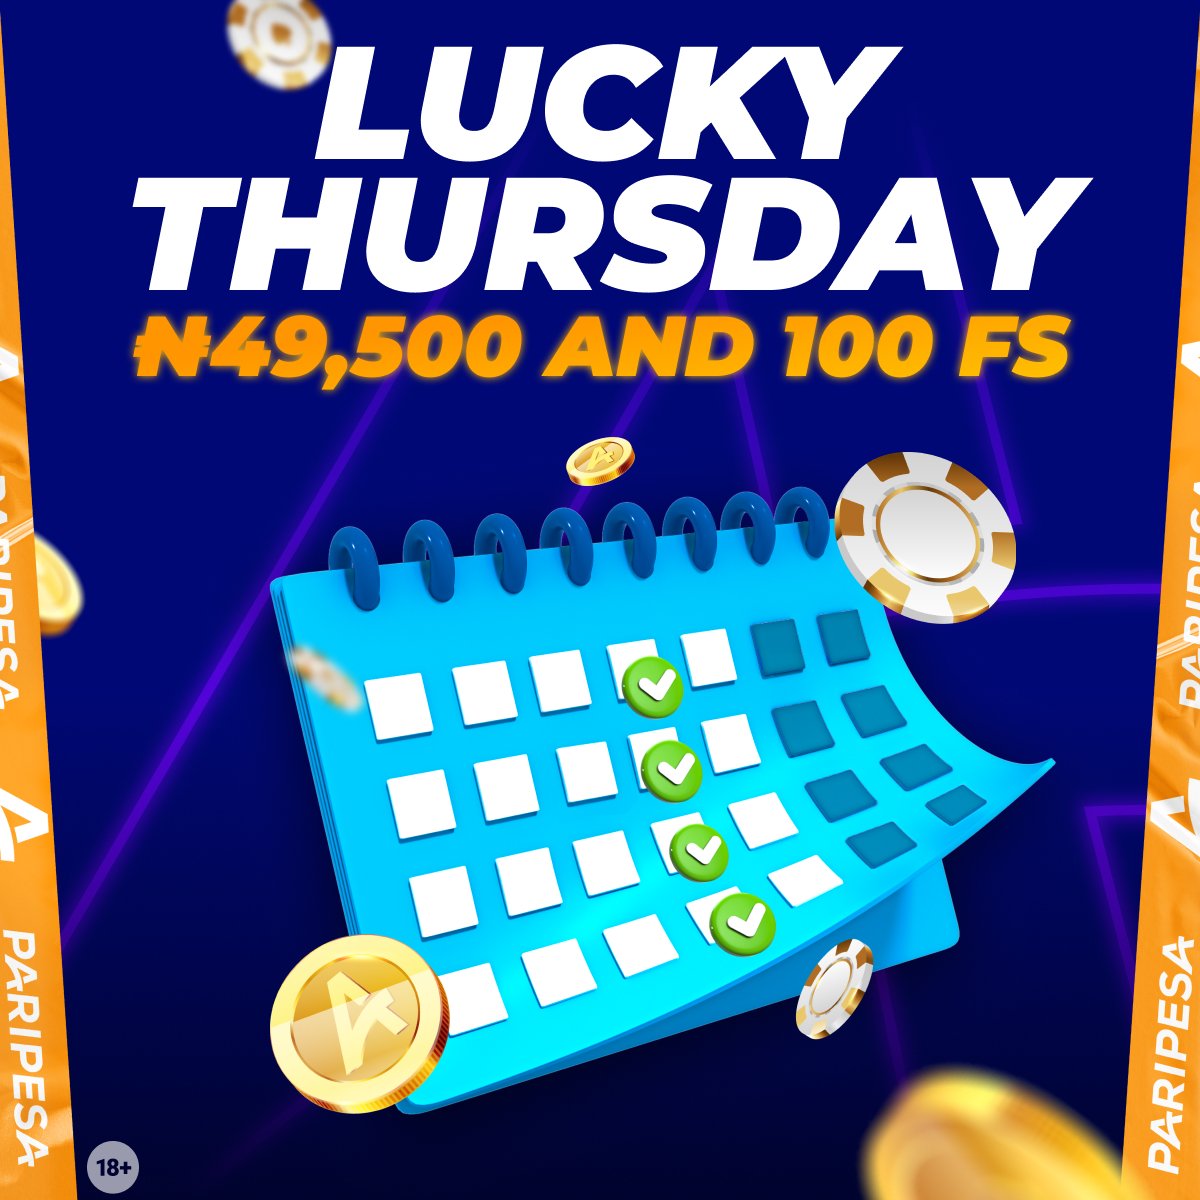 🍀 Today is Lucky Thursday And in general, every Thursday is lucky with PariPesa! 👉 All details on the website! m.paripesa.bet/e8l #luckythuesday